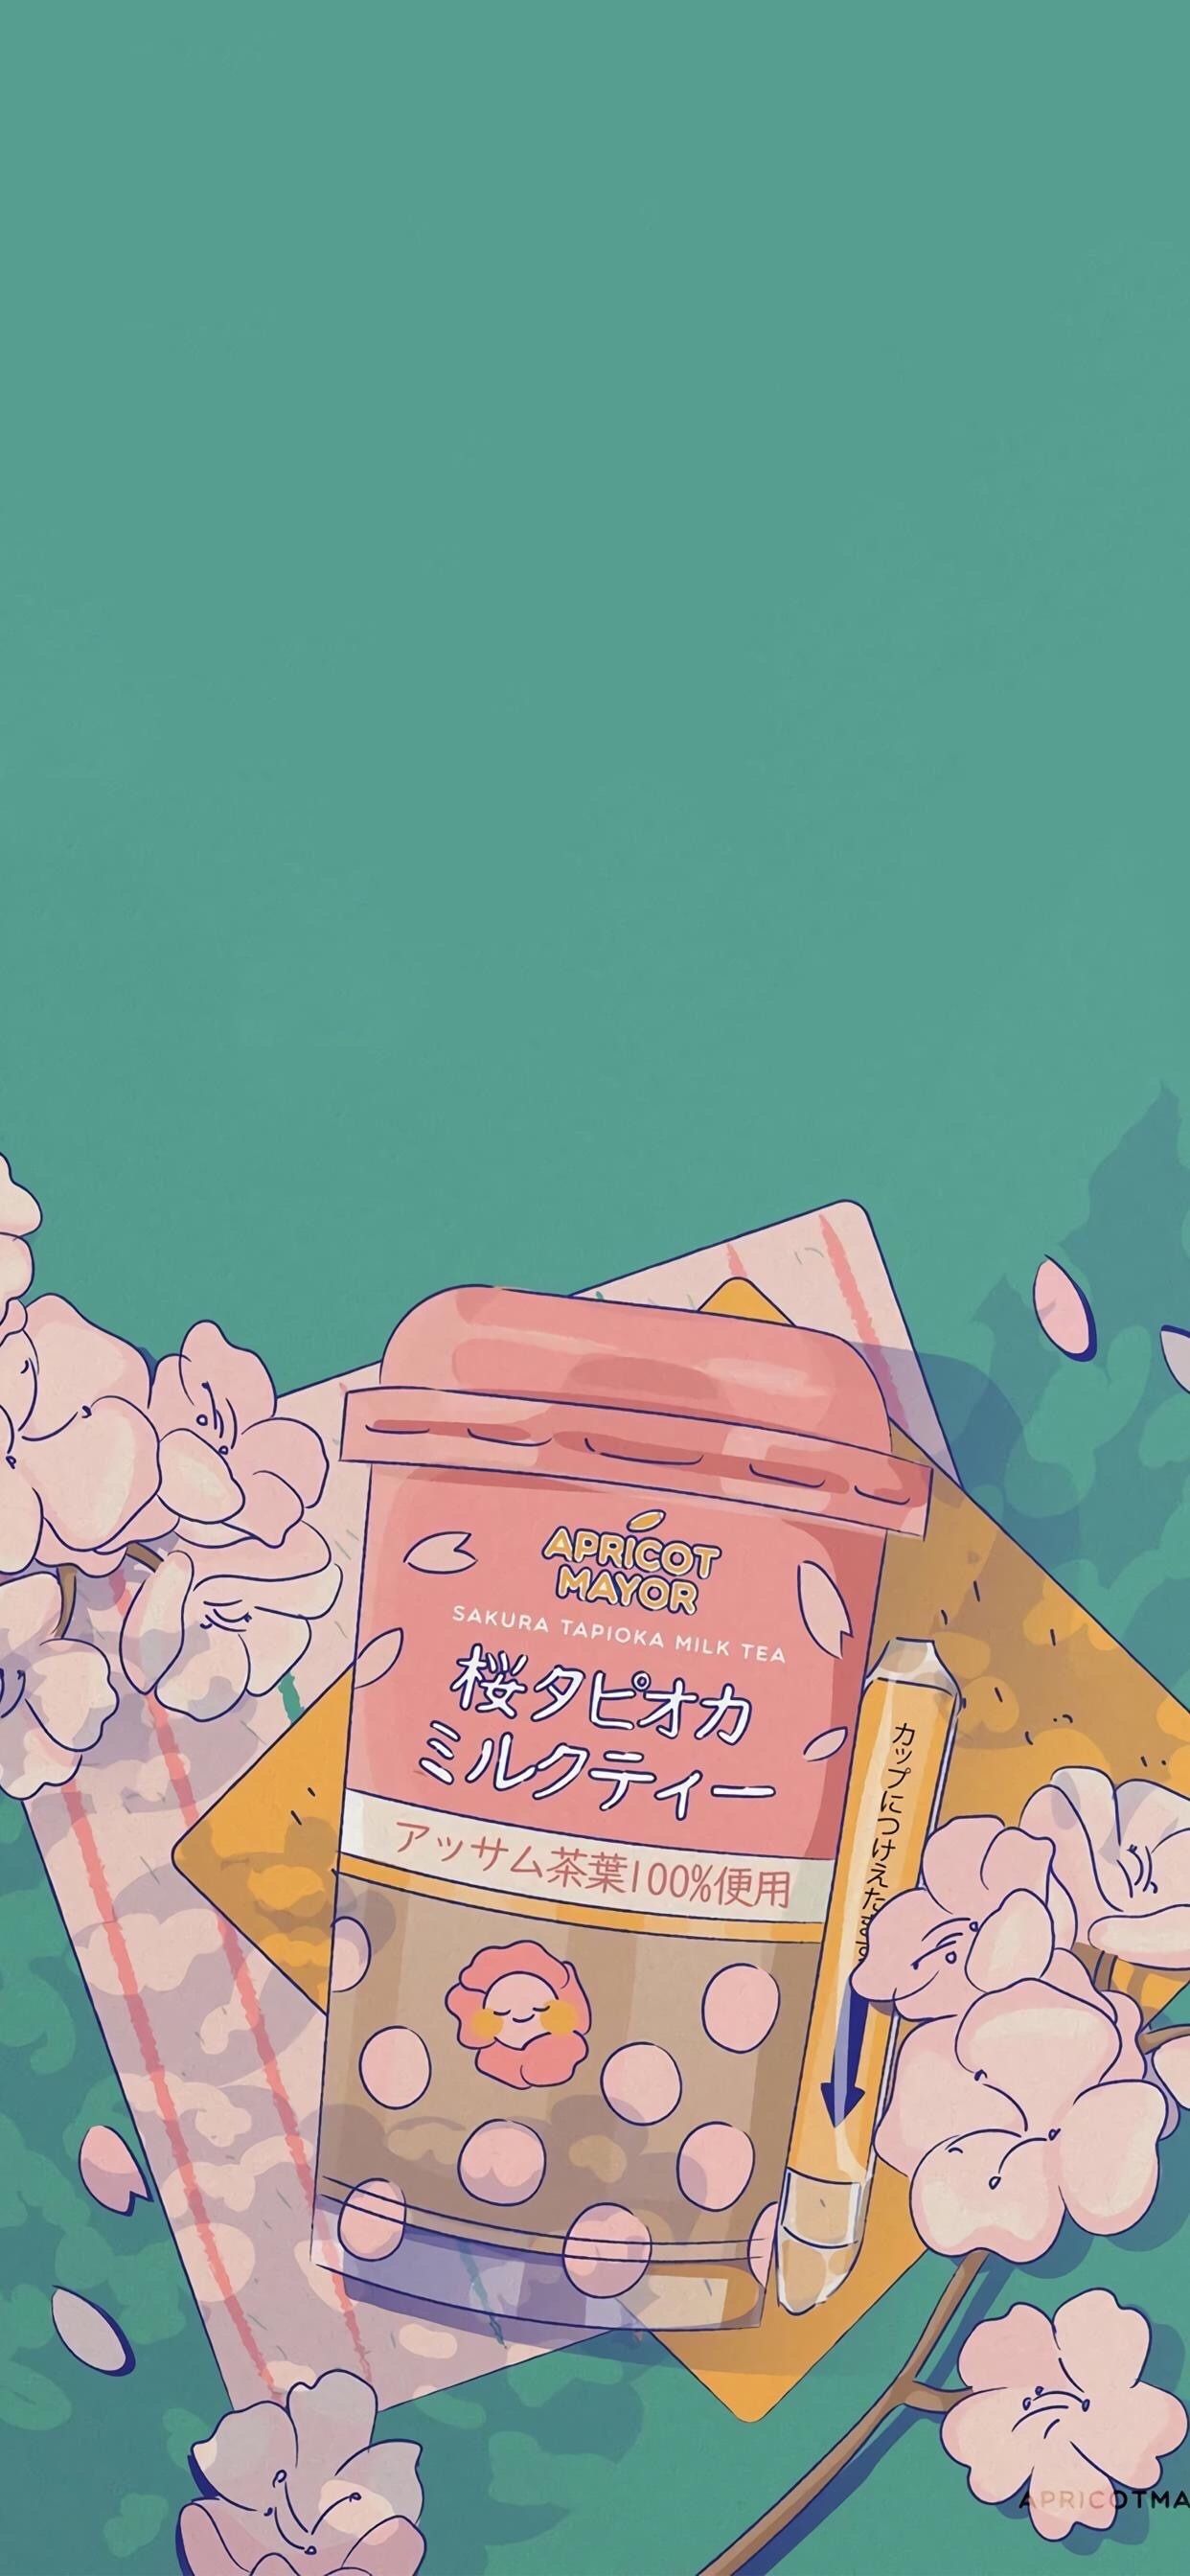 Pastel Aesthetic Anime Wallpapers